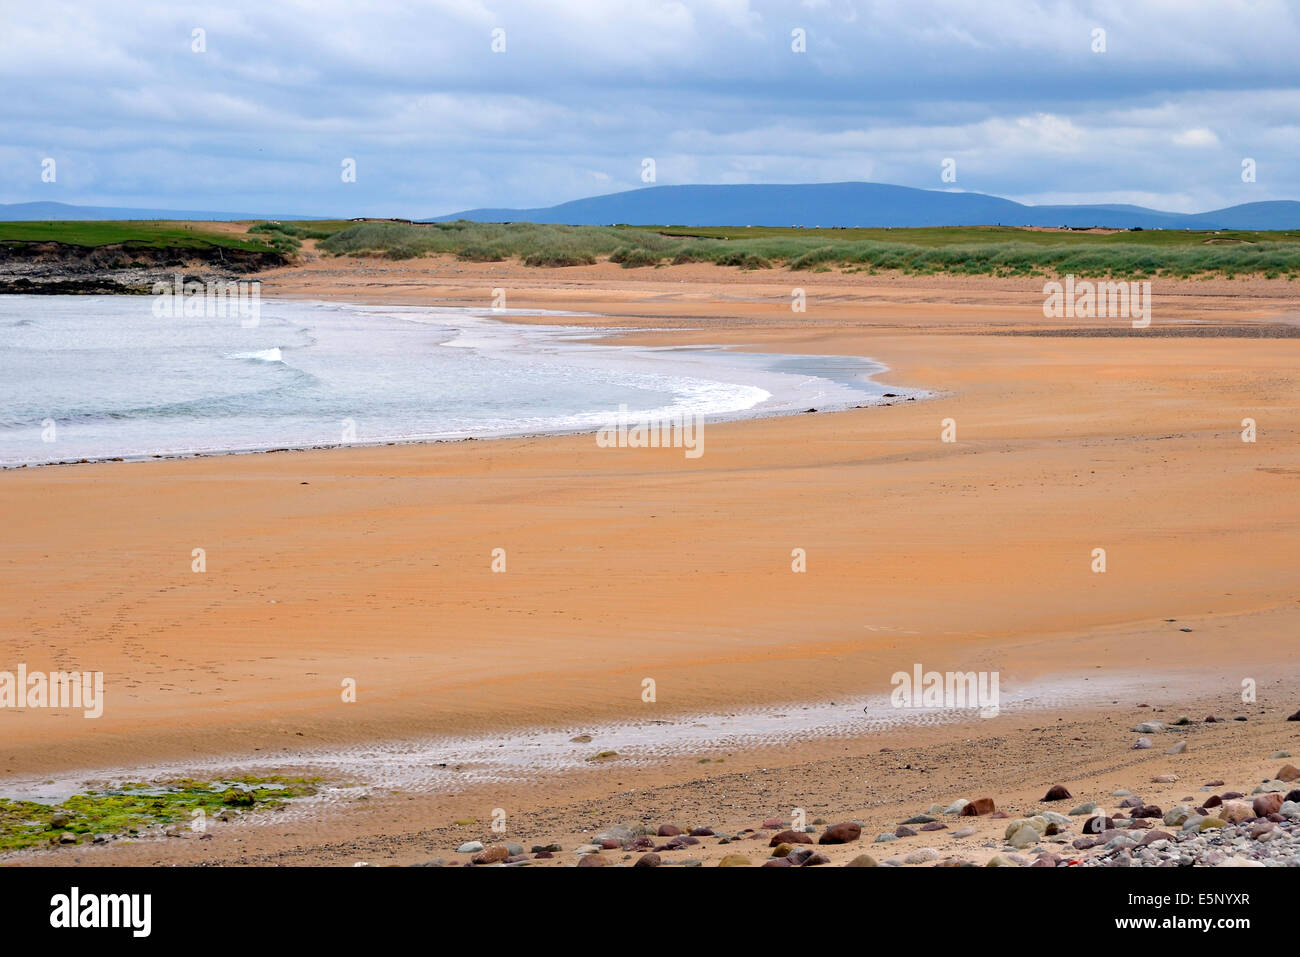 Golden Strand beach at Dugort, Achill Island, County Mayo, Ireland a vast unspoilt blue flag beach with sand dunes behind. Stock Photo